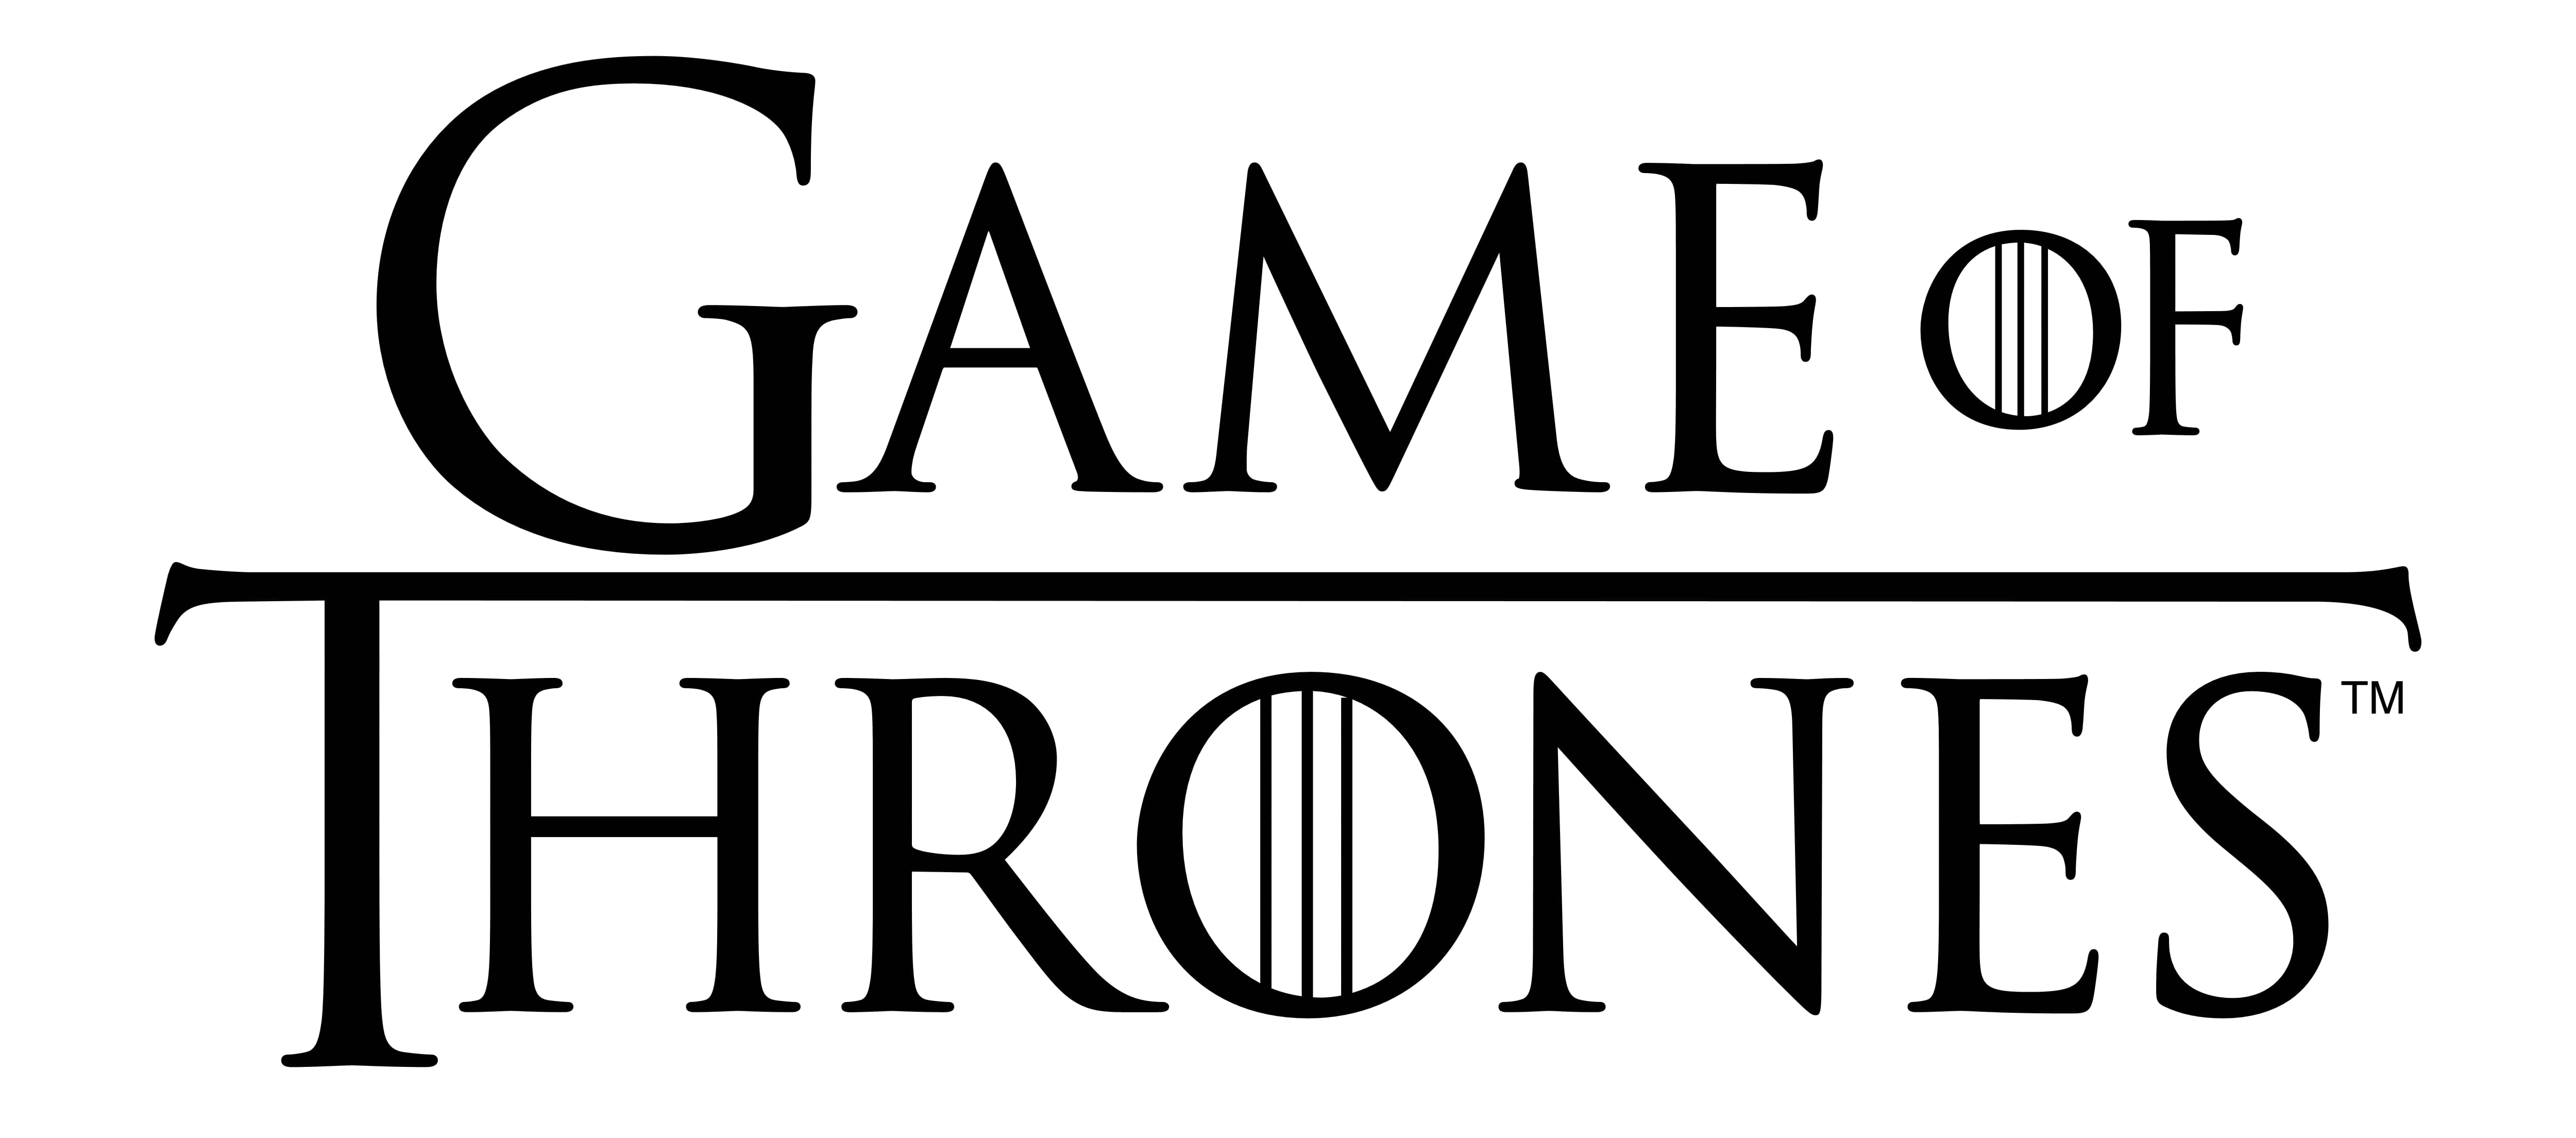 16 Best Game of Thrones Logos and What Makes Them So Perfect in